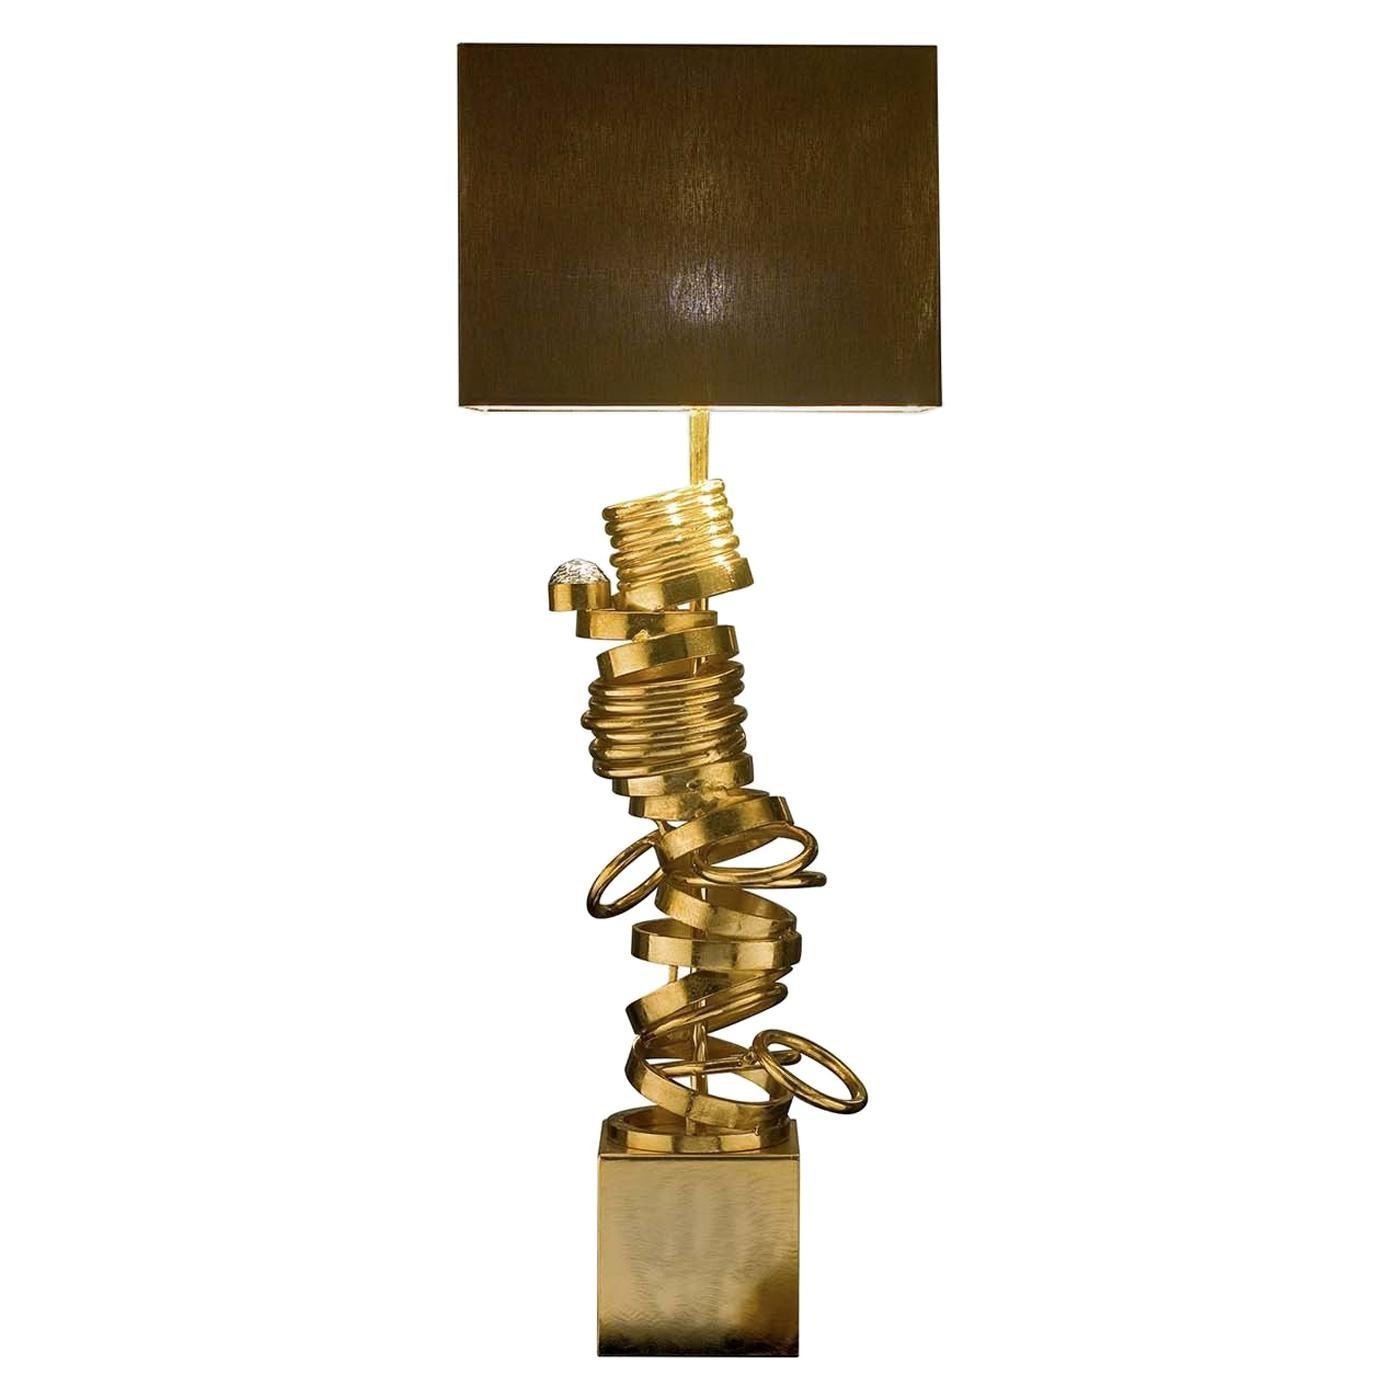 CL1900 Brown and Golden Table Lamp with Swarovski Crystal